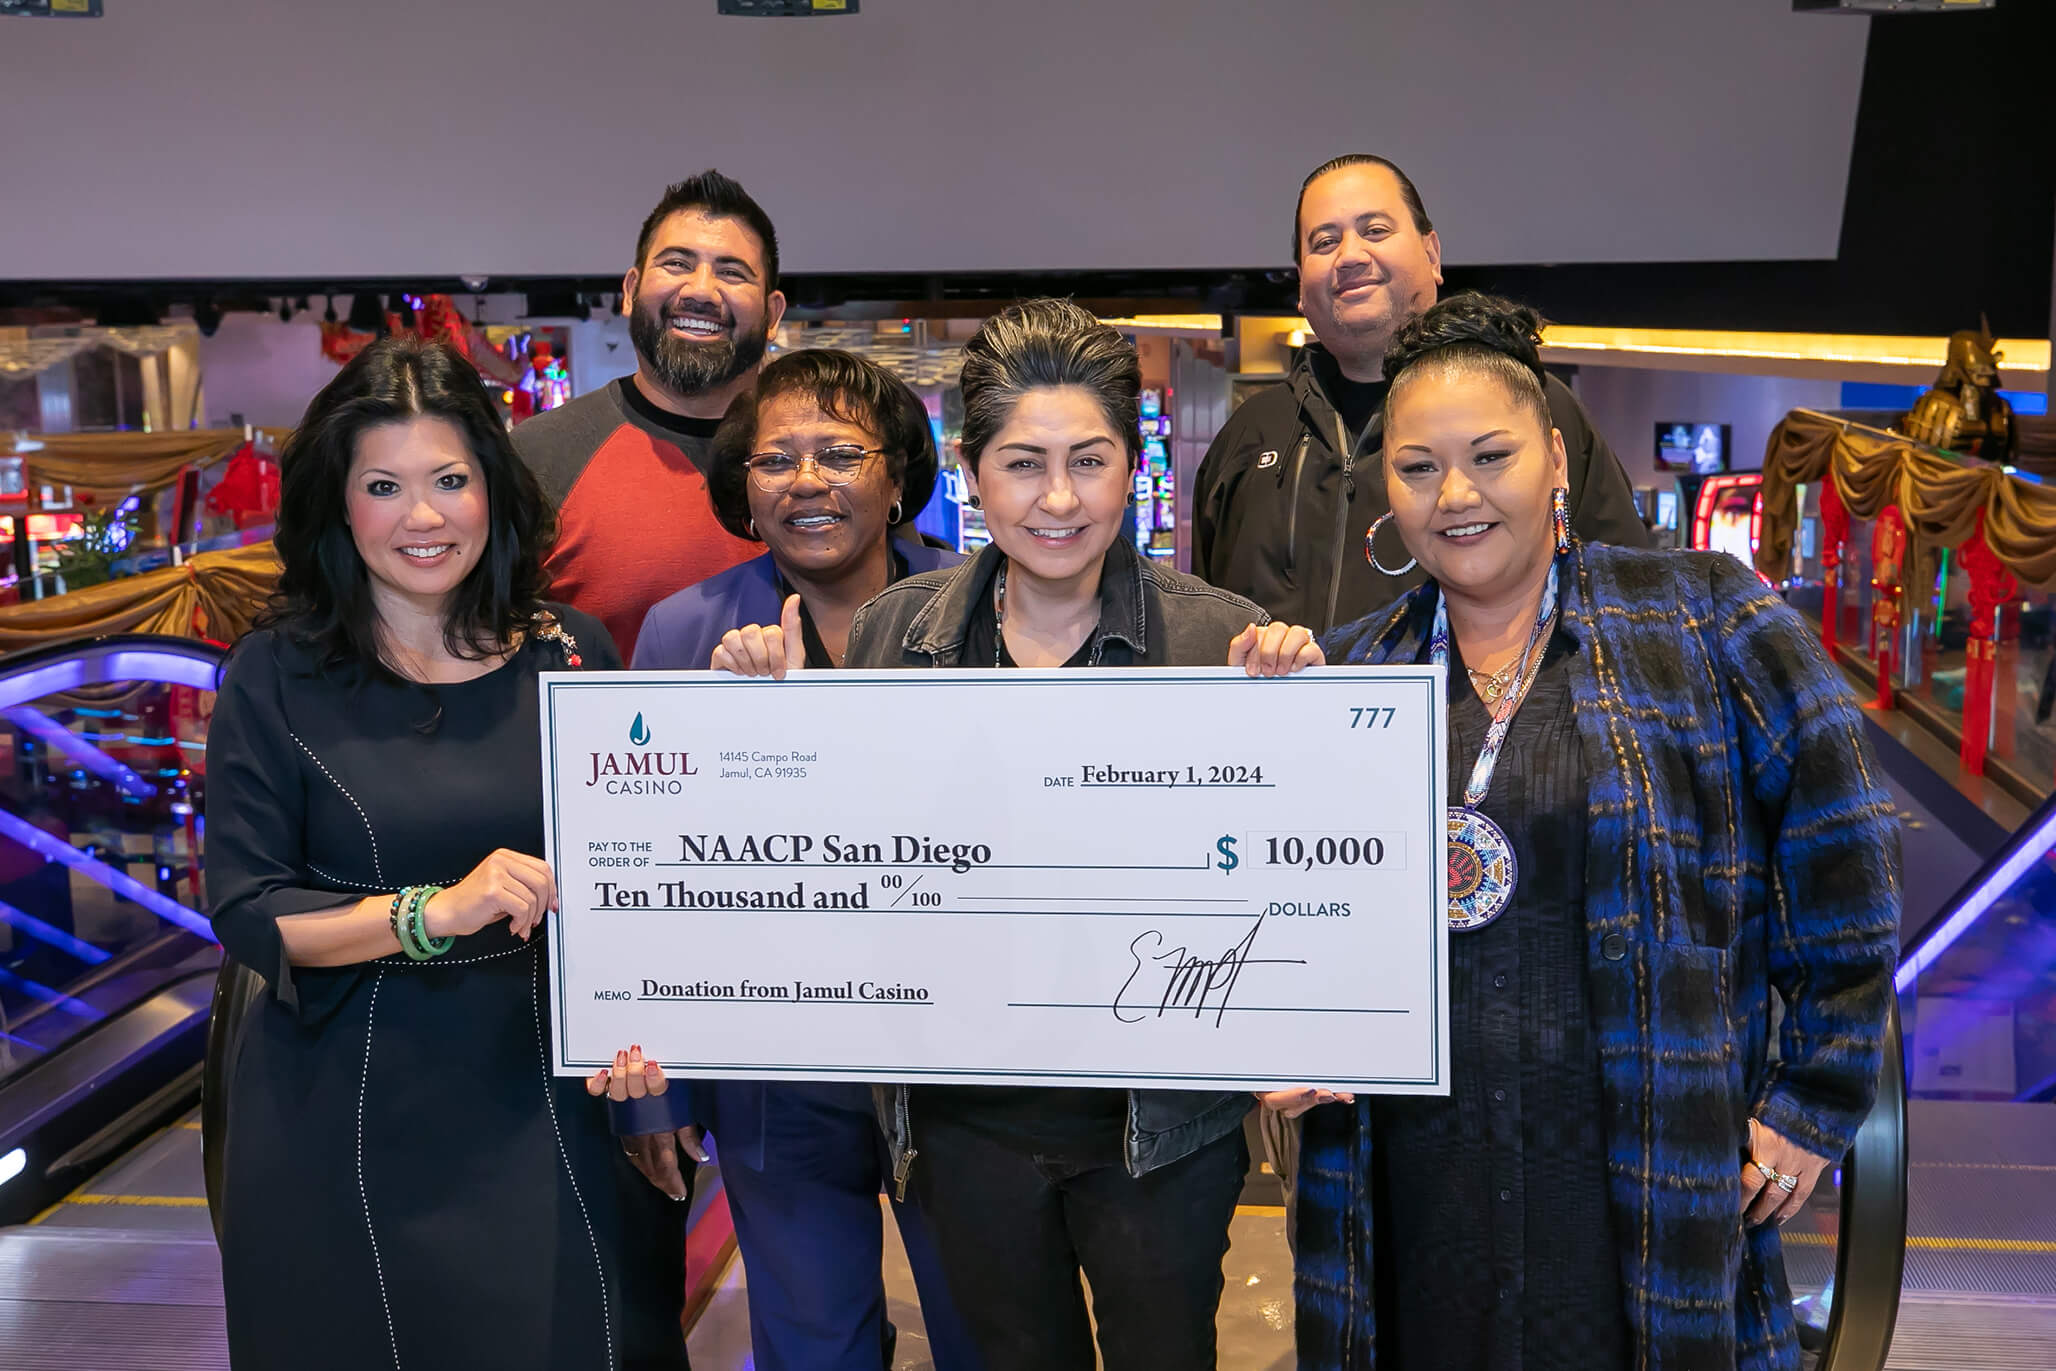 Jamul Casino team awards NAACP San Diego a check of $10,000